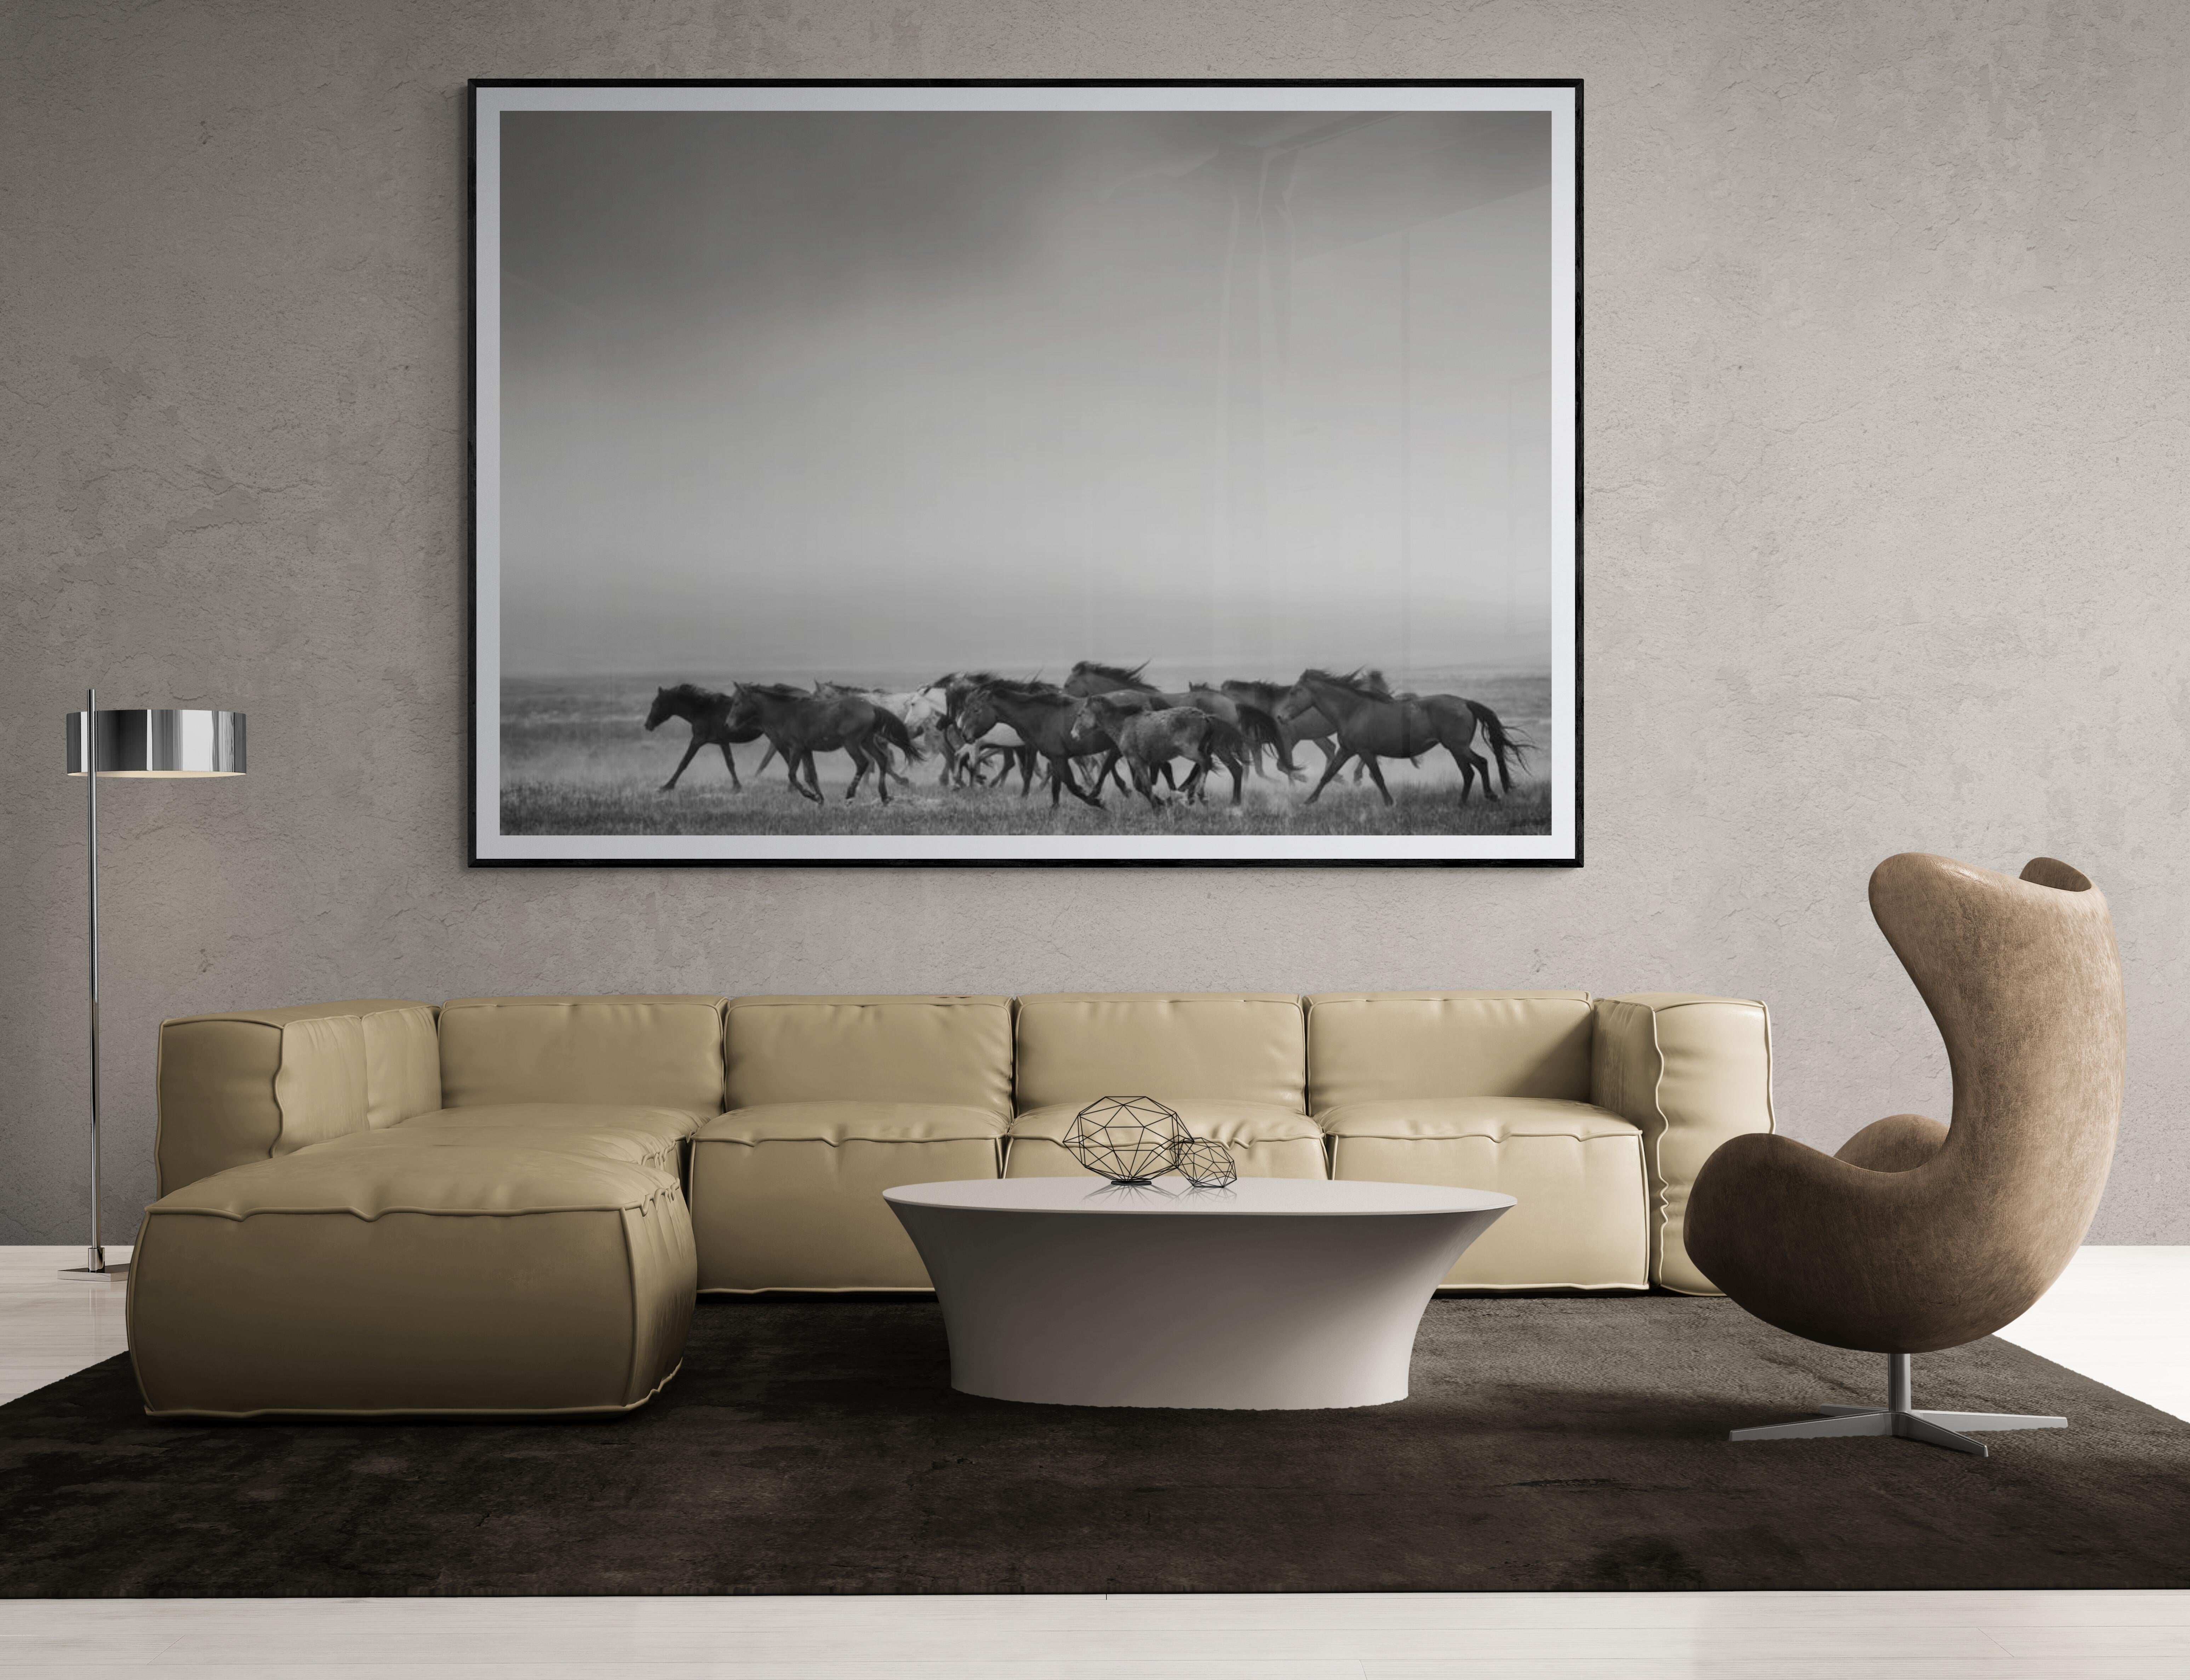 This is a black and white photograph of American Wild Mustangs by Shane Russeck. 
Printed on Archival Paper Using Archival ink

 Shane Russeck has built a reputation for capturing America's landscapes, cultures and endangered animals. Born in